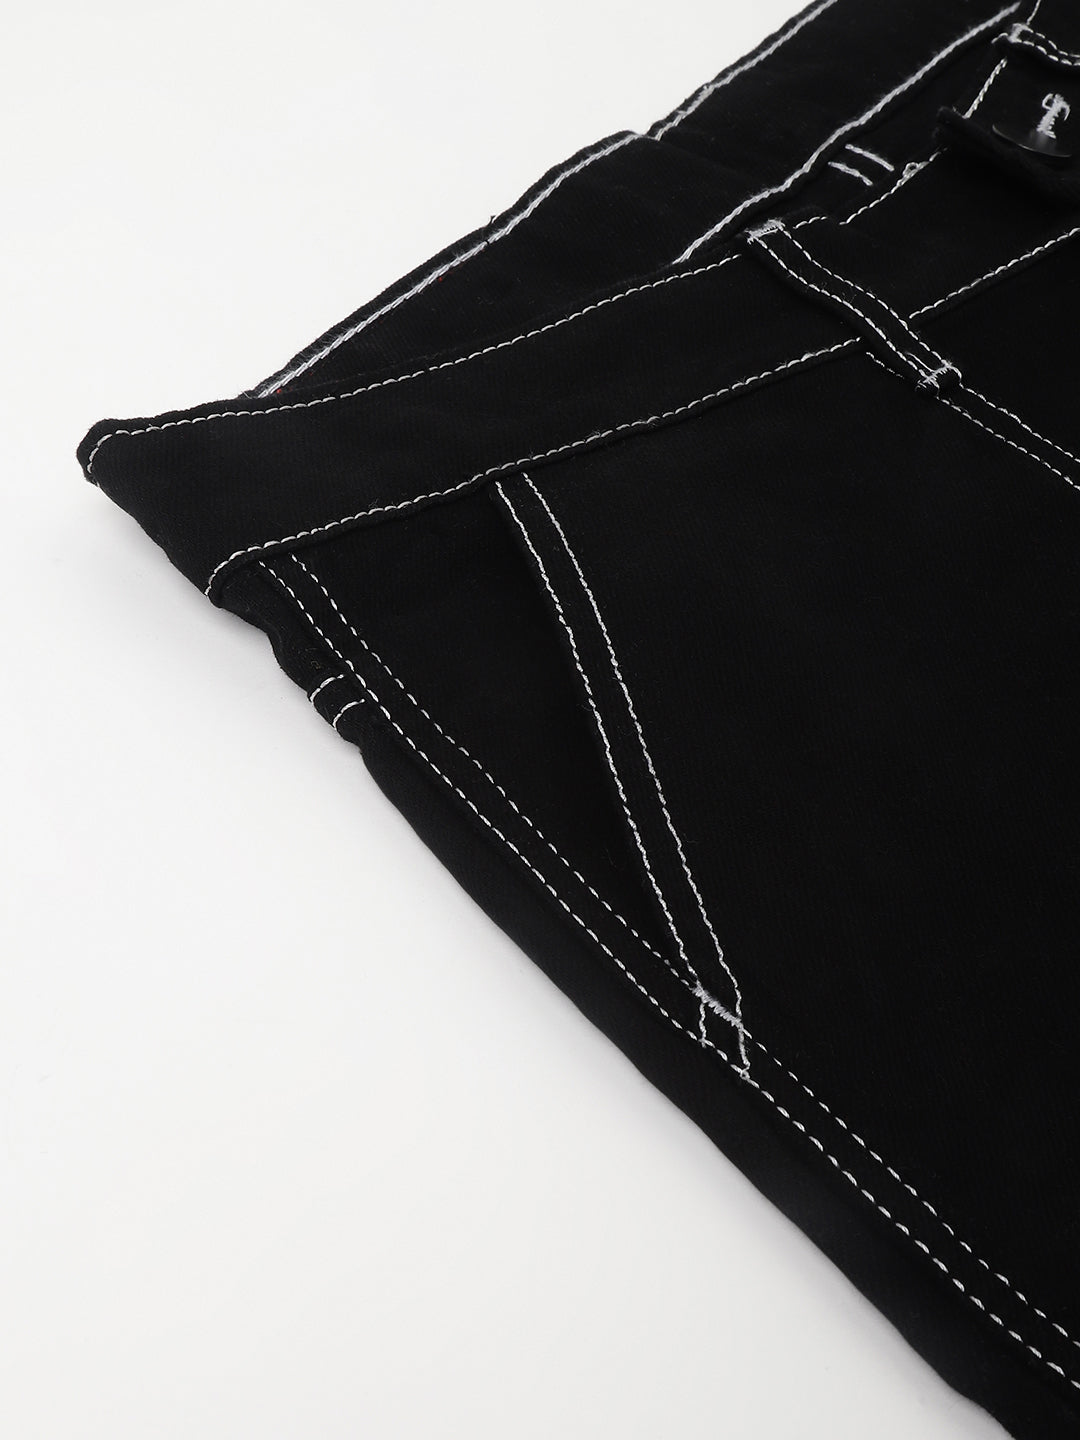 Bwolves Black Baggy Fit 6-Pocket Jeans with White Thread Stitch